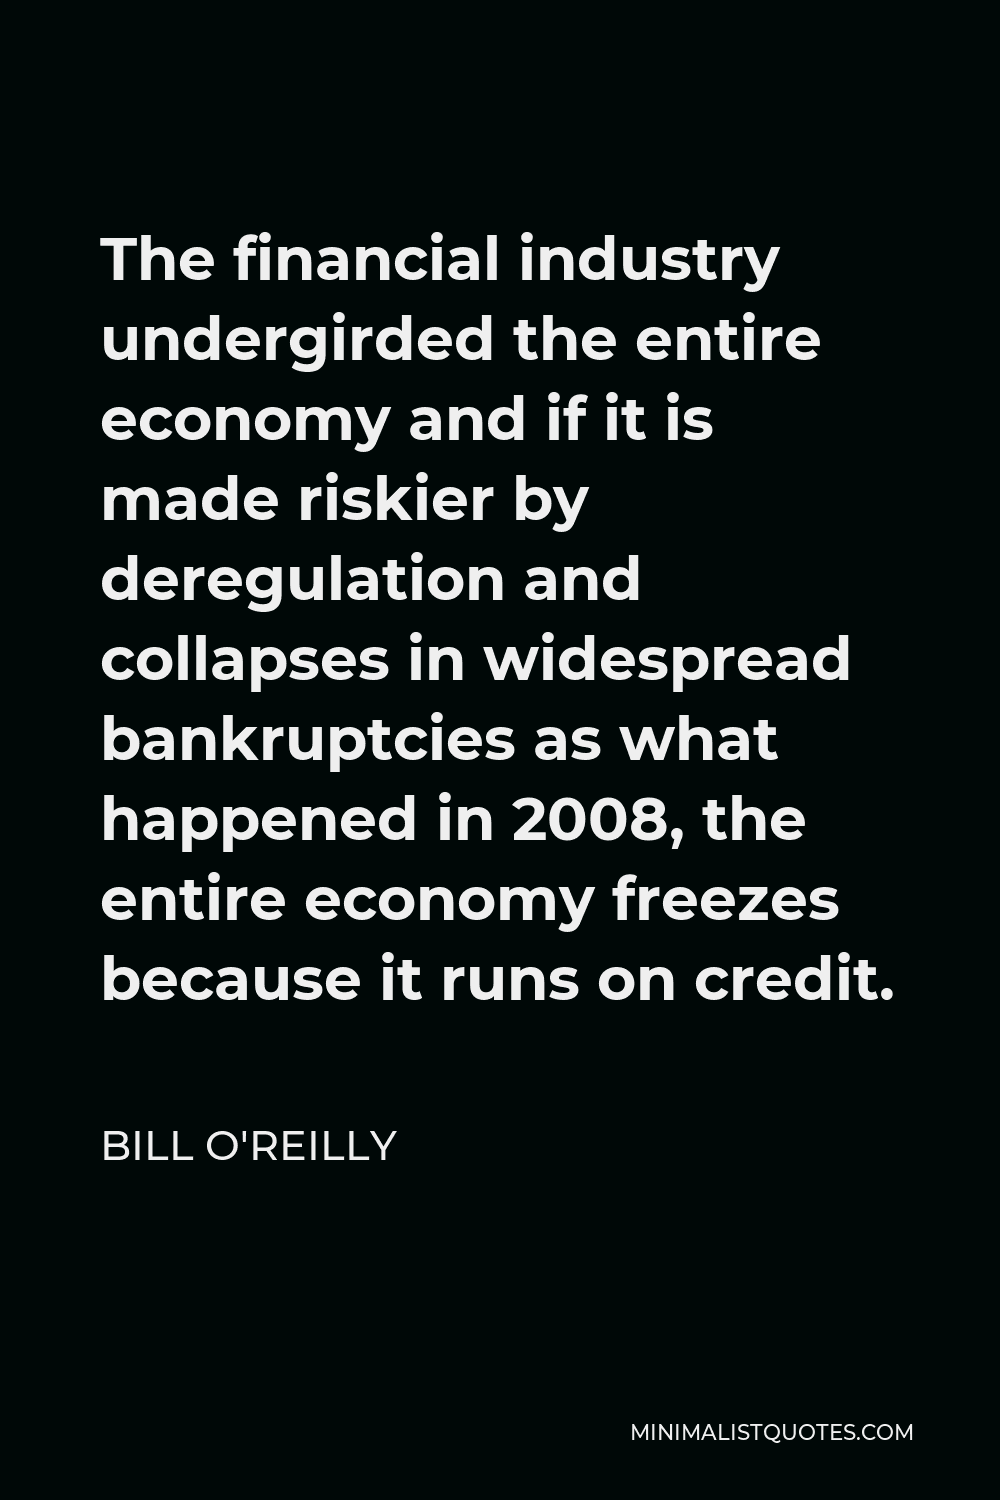 Bill O'Reilly Quote - The financial industry undergirded the entire economy and if it is made riskier by deregulation and collapses in widespread bankruptcies as what happened in 2008, the entire economy freezes because it runs on credit.